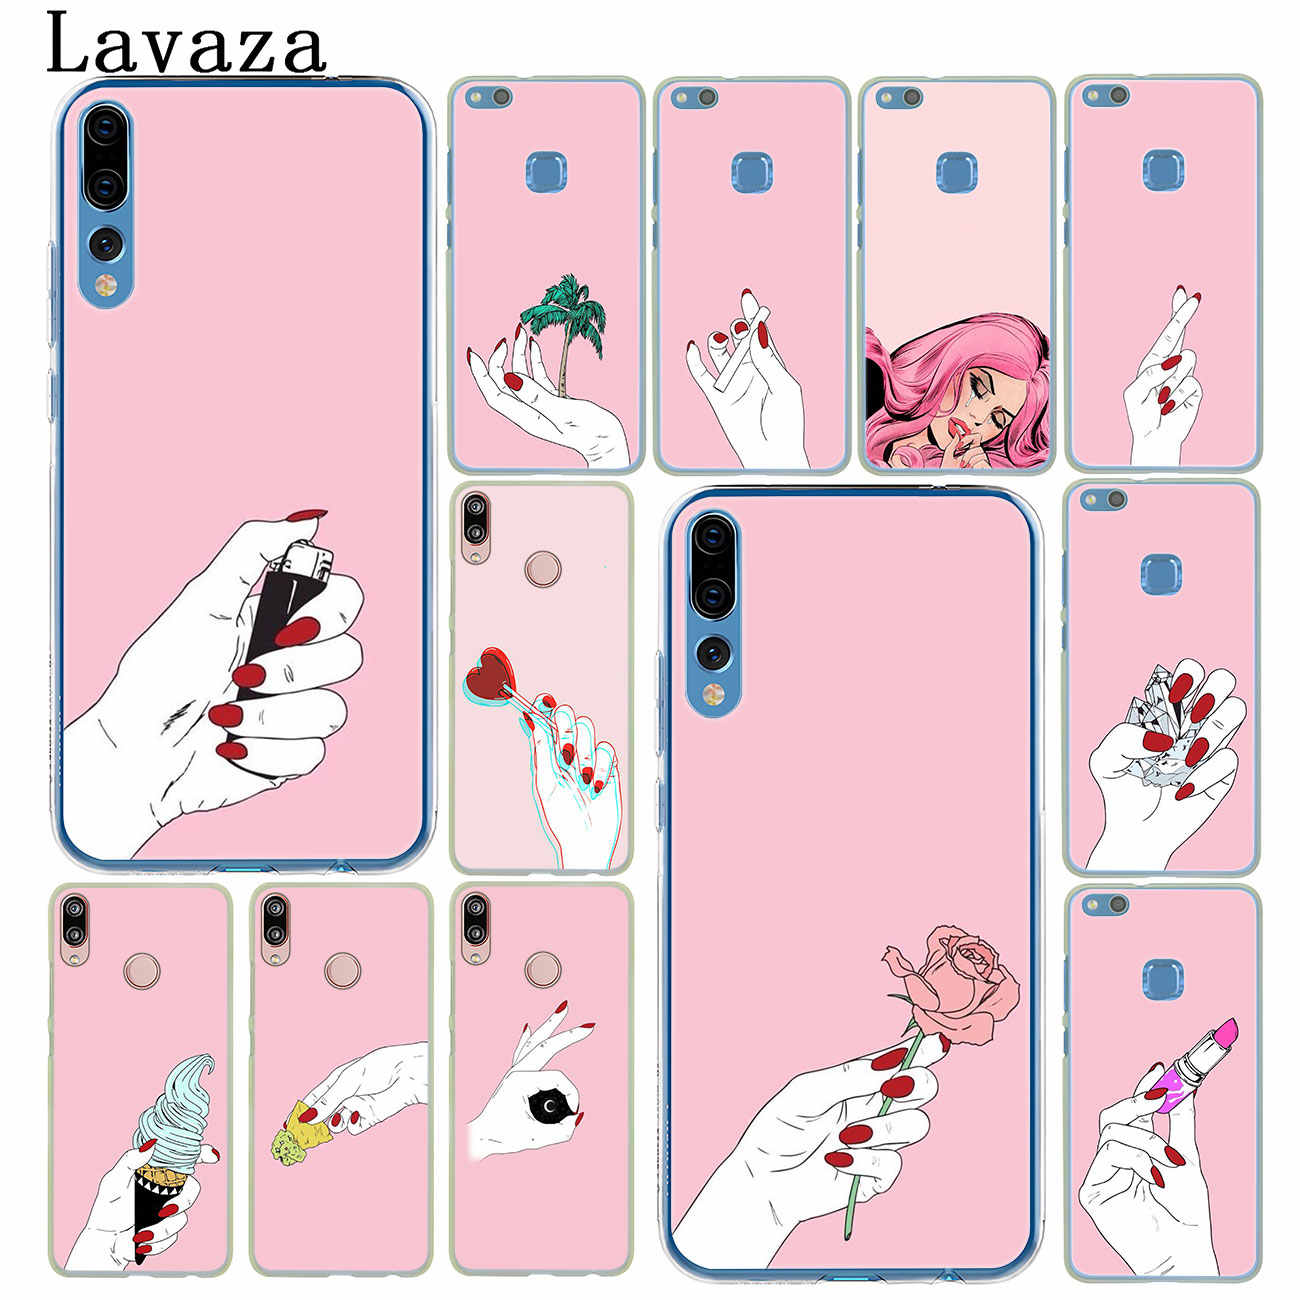 Lavaza Woman Girl Hand Wallpaper Phone Case For Huawei - Huawei P20 Pro Phone Case Bts , HD Wallpaper & Backgrounds